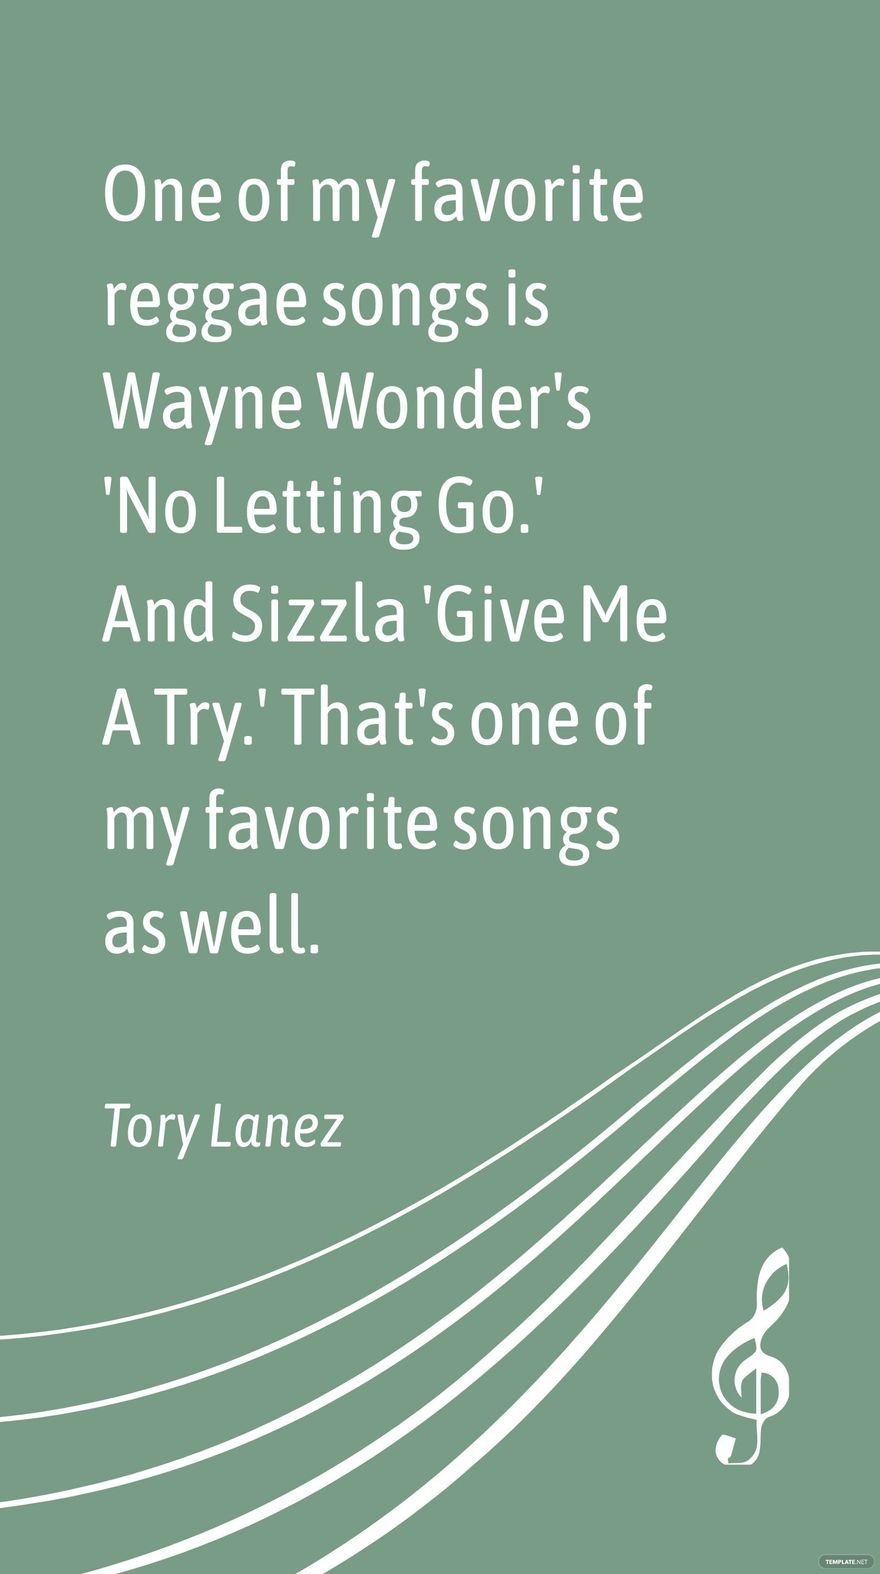 Tory Lanez - One of my favorite reggae songs is Wayne Wonder's 'No Letting Go.' And Sizzla 'Give Me A Try.' That's one of my favorite songs as well.